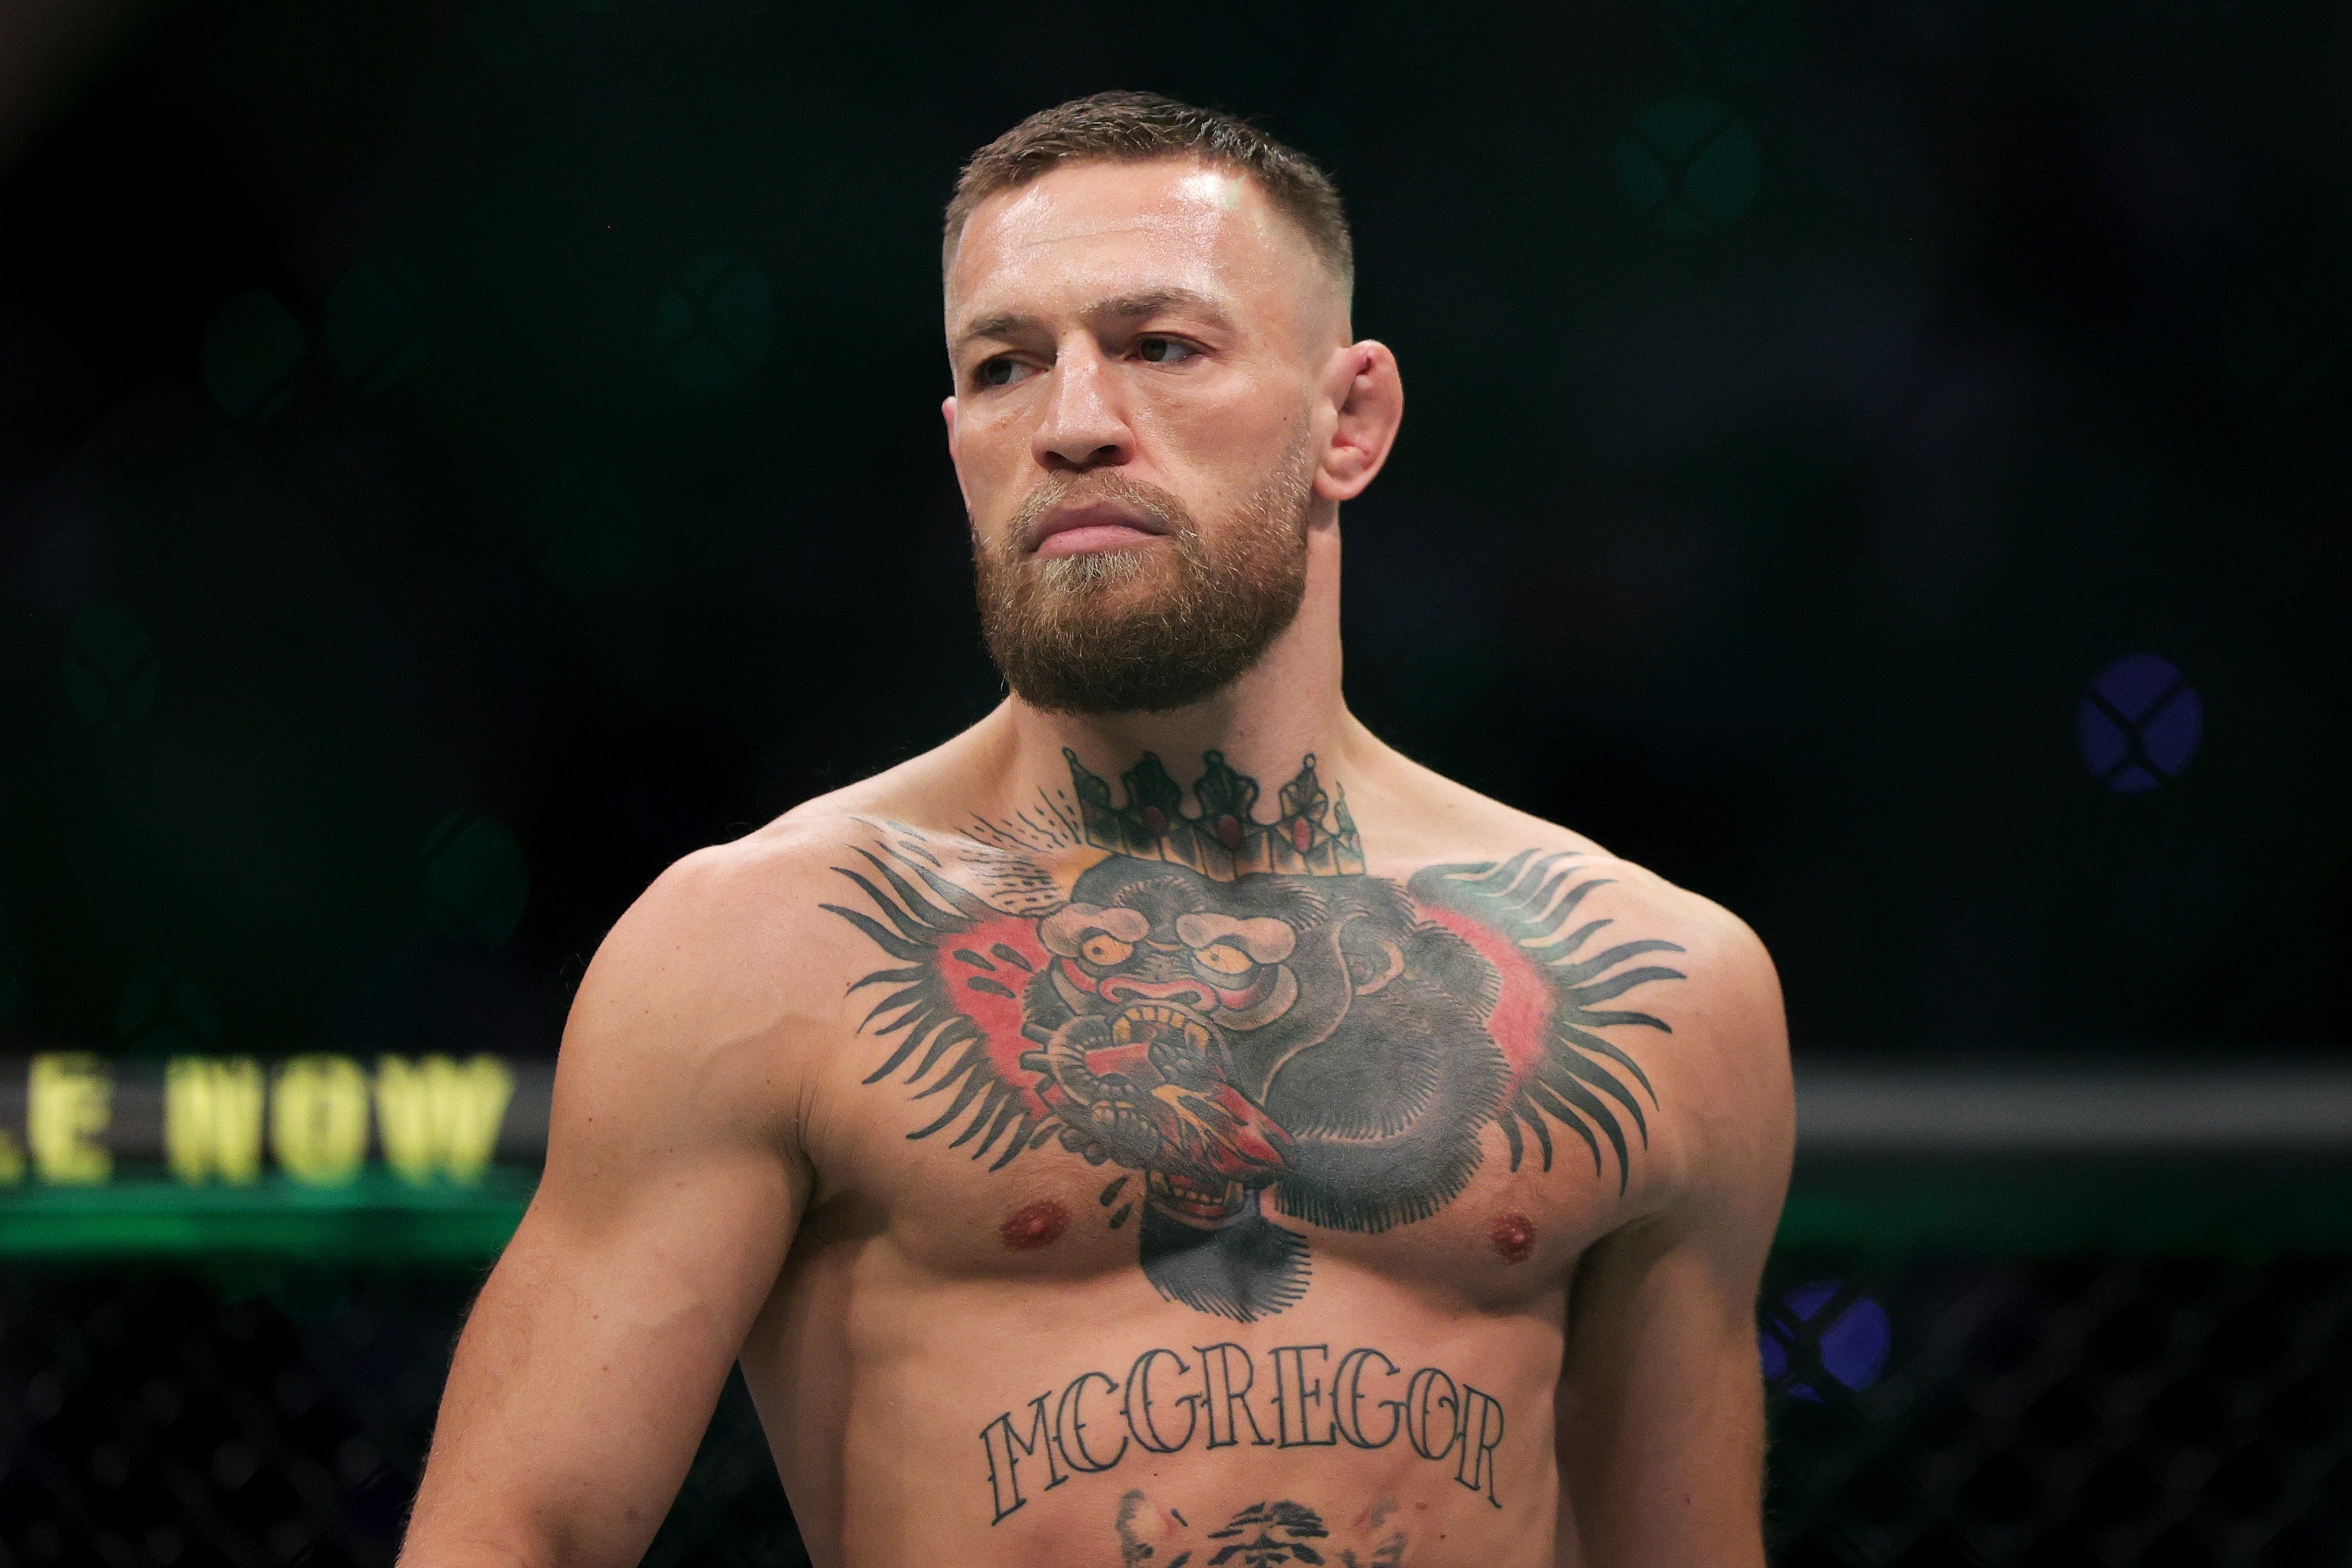 What Is Conor McGregor's Net Worth? - What Is Conor McGregor Worth